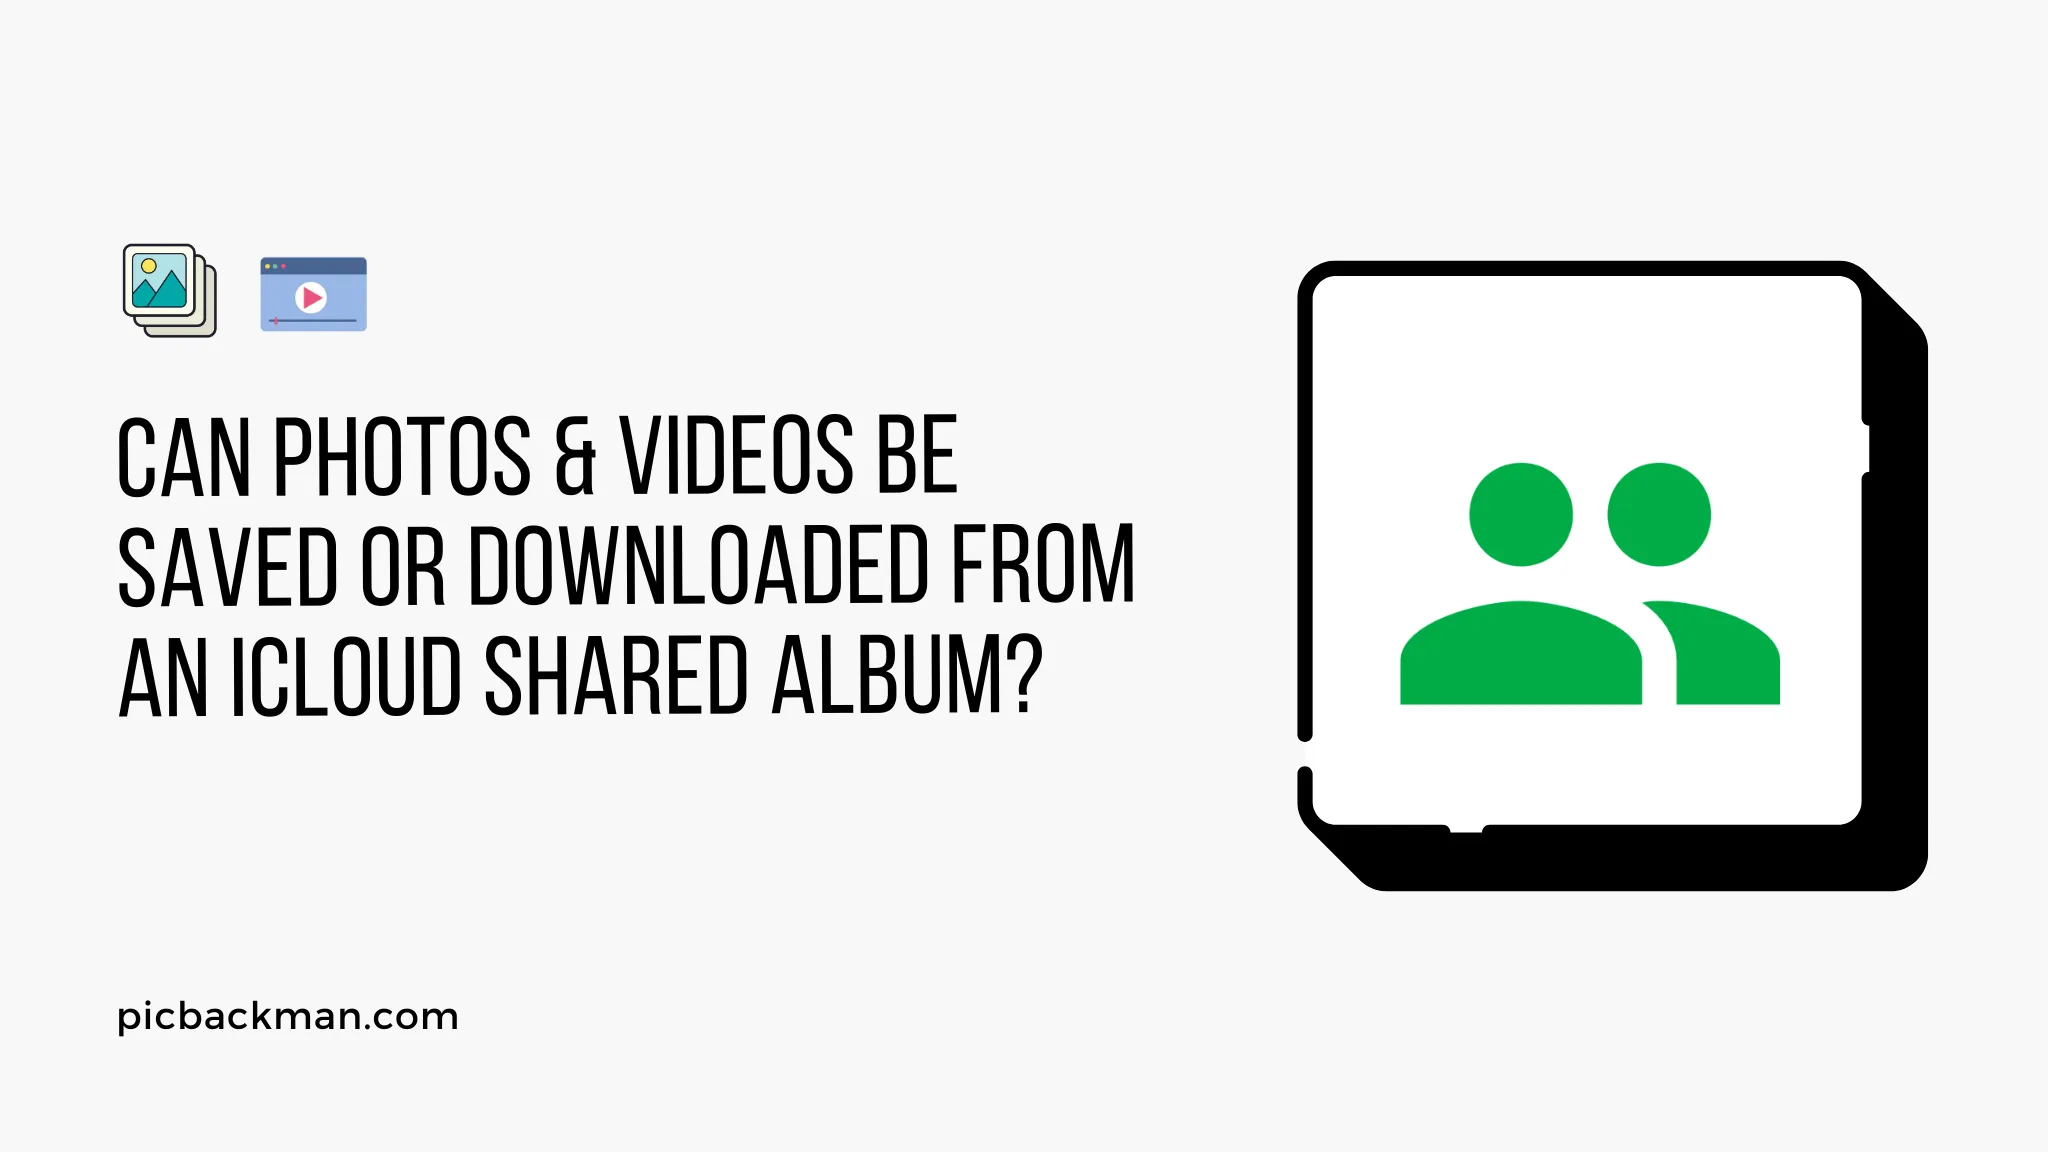 Can photos & videos be saved or downloaded from an iCloud shared album